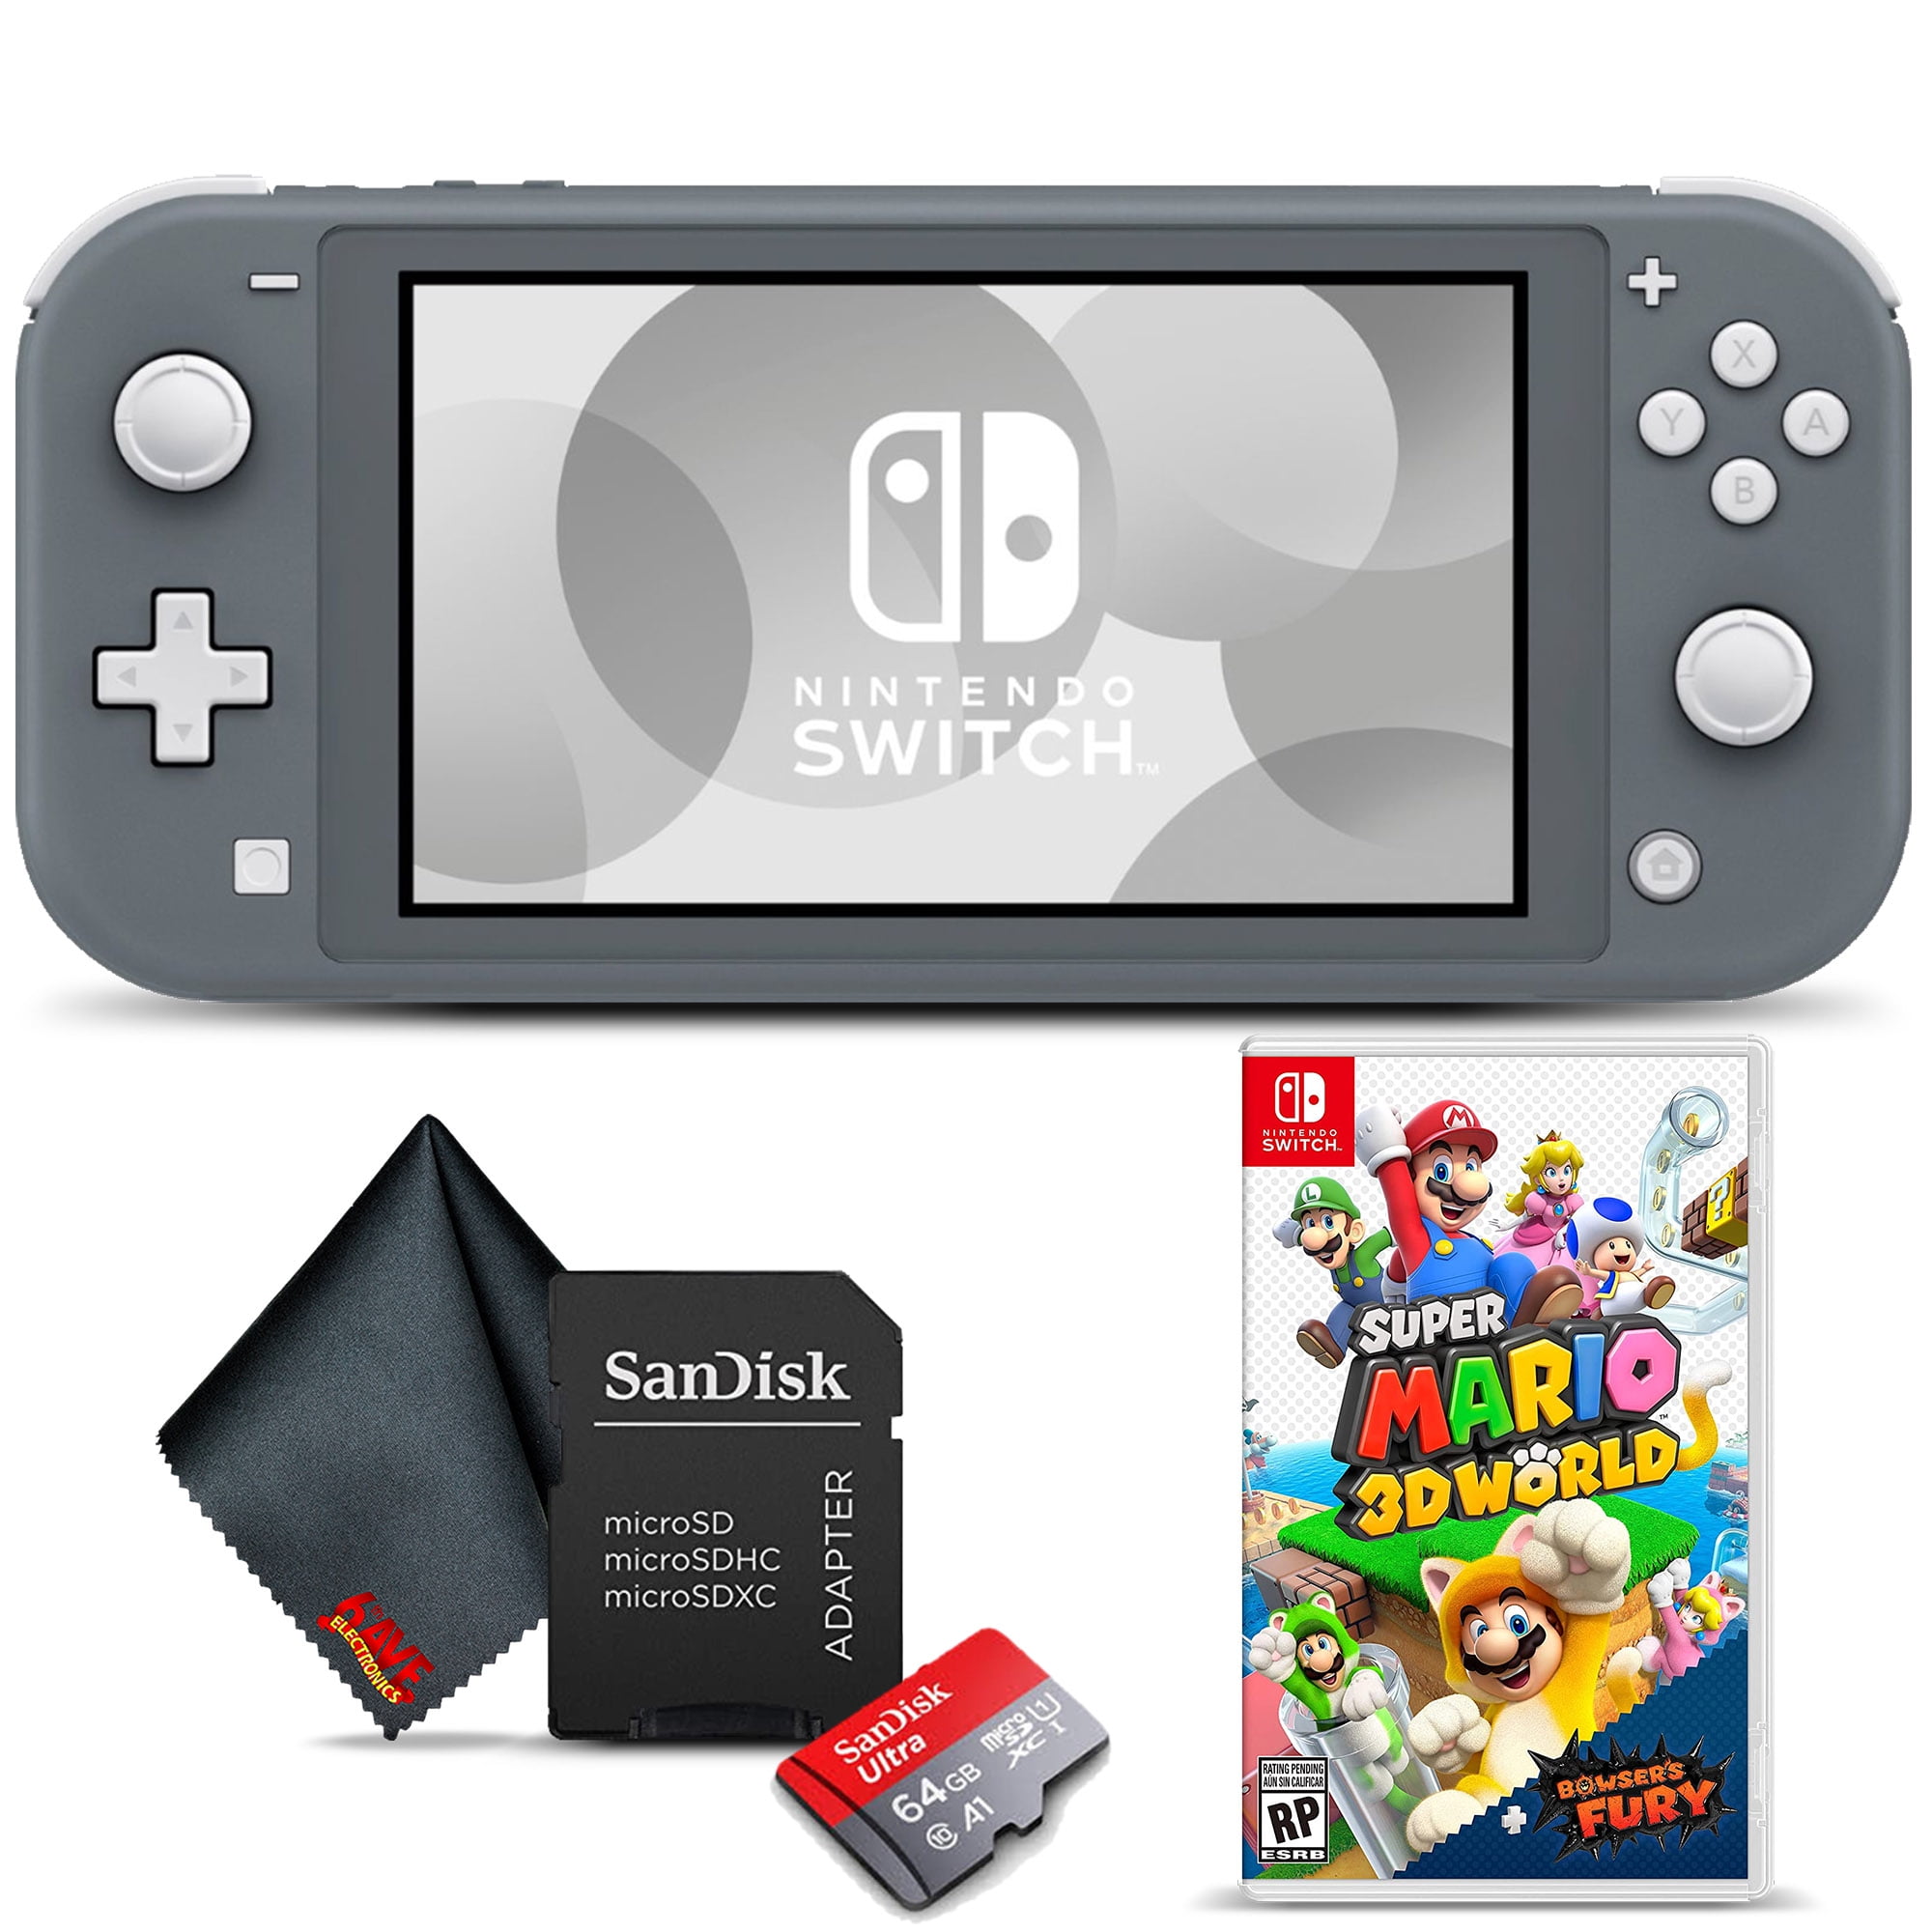 Nintendo Switch Lite (Gray) with Super Mario 3D World + Bowser's